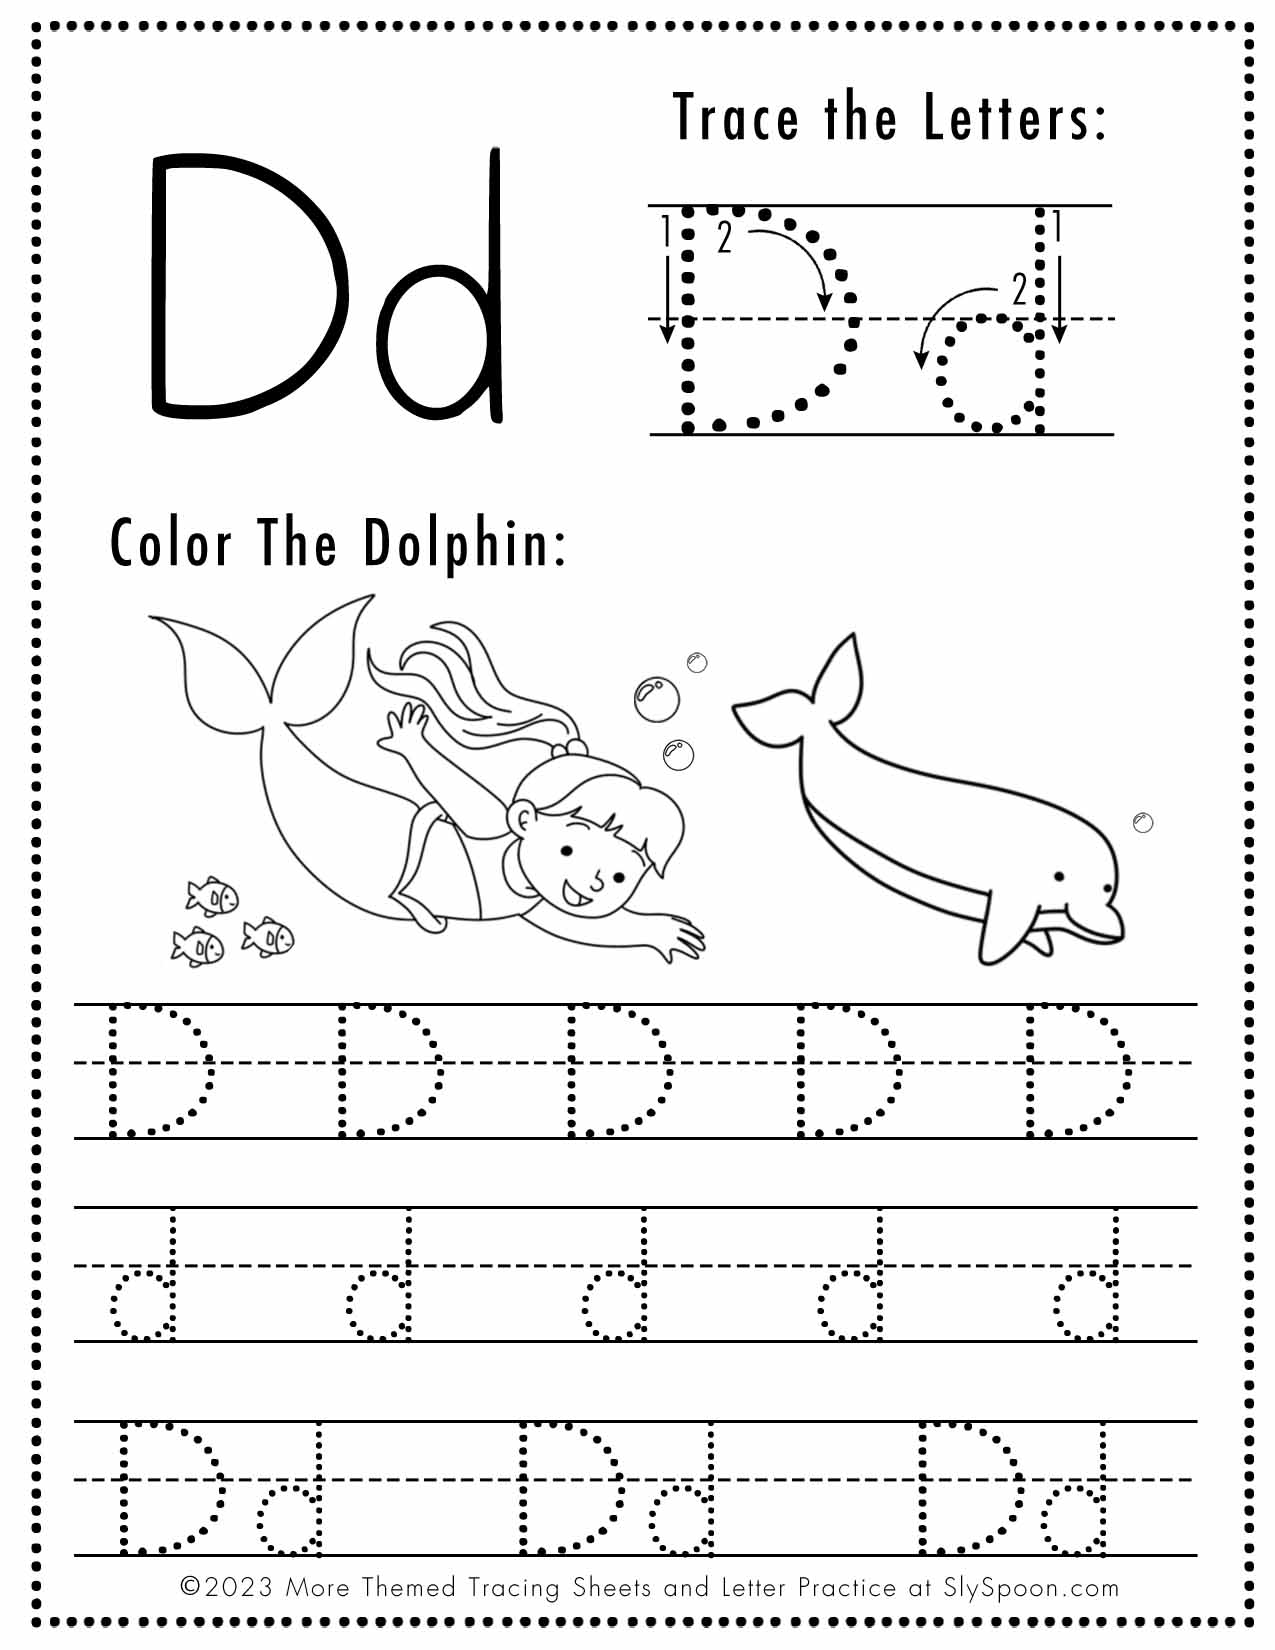 free-letter-d-tracing-worksheets-printable-mermaid-themed-sly-spoon